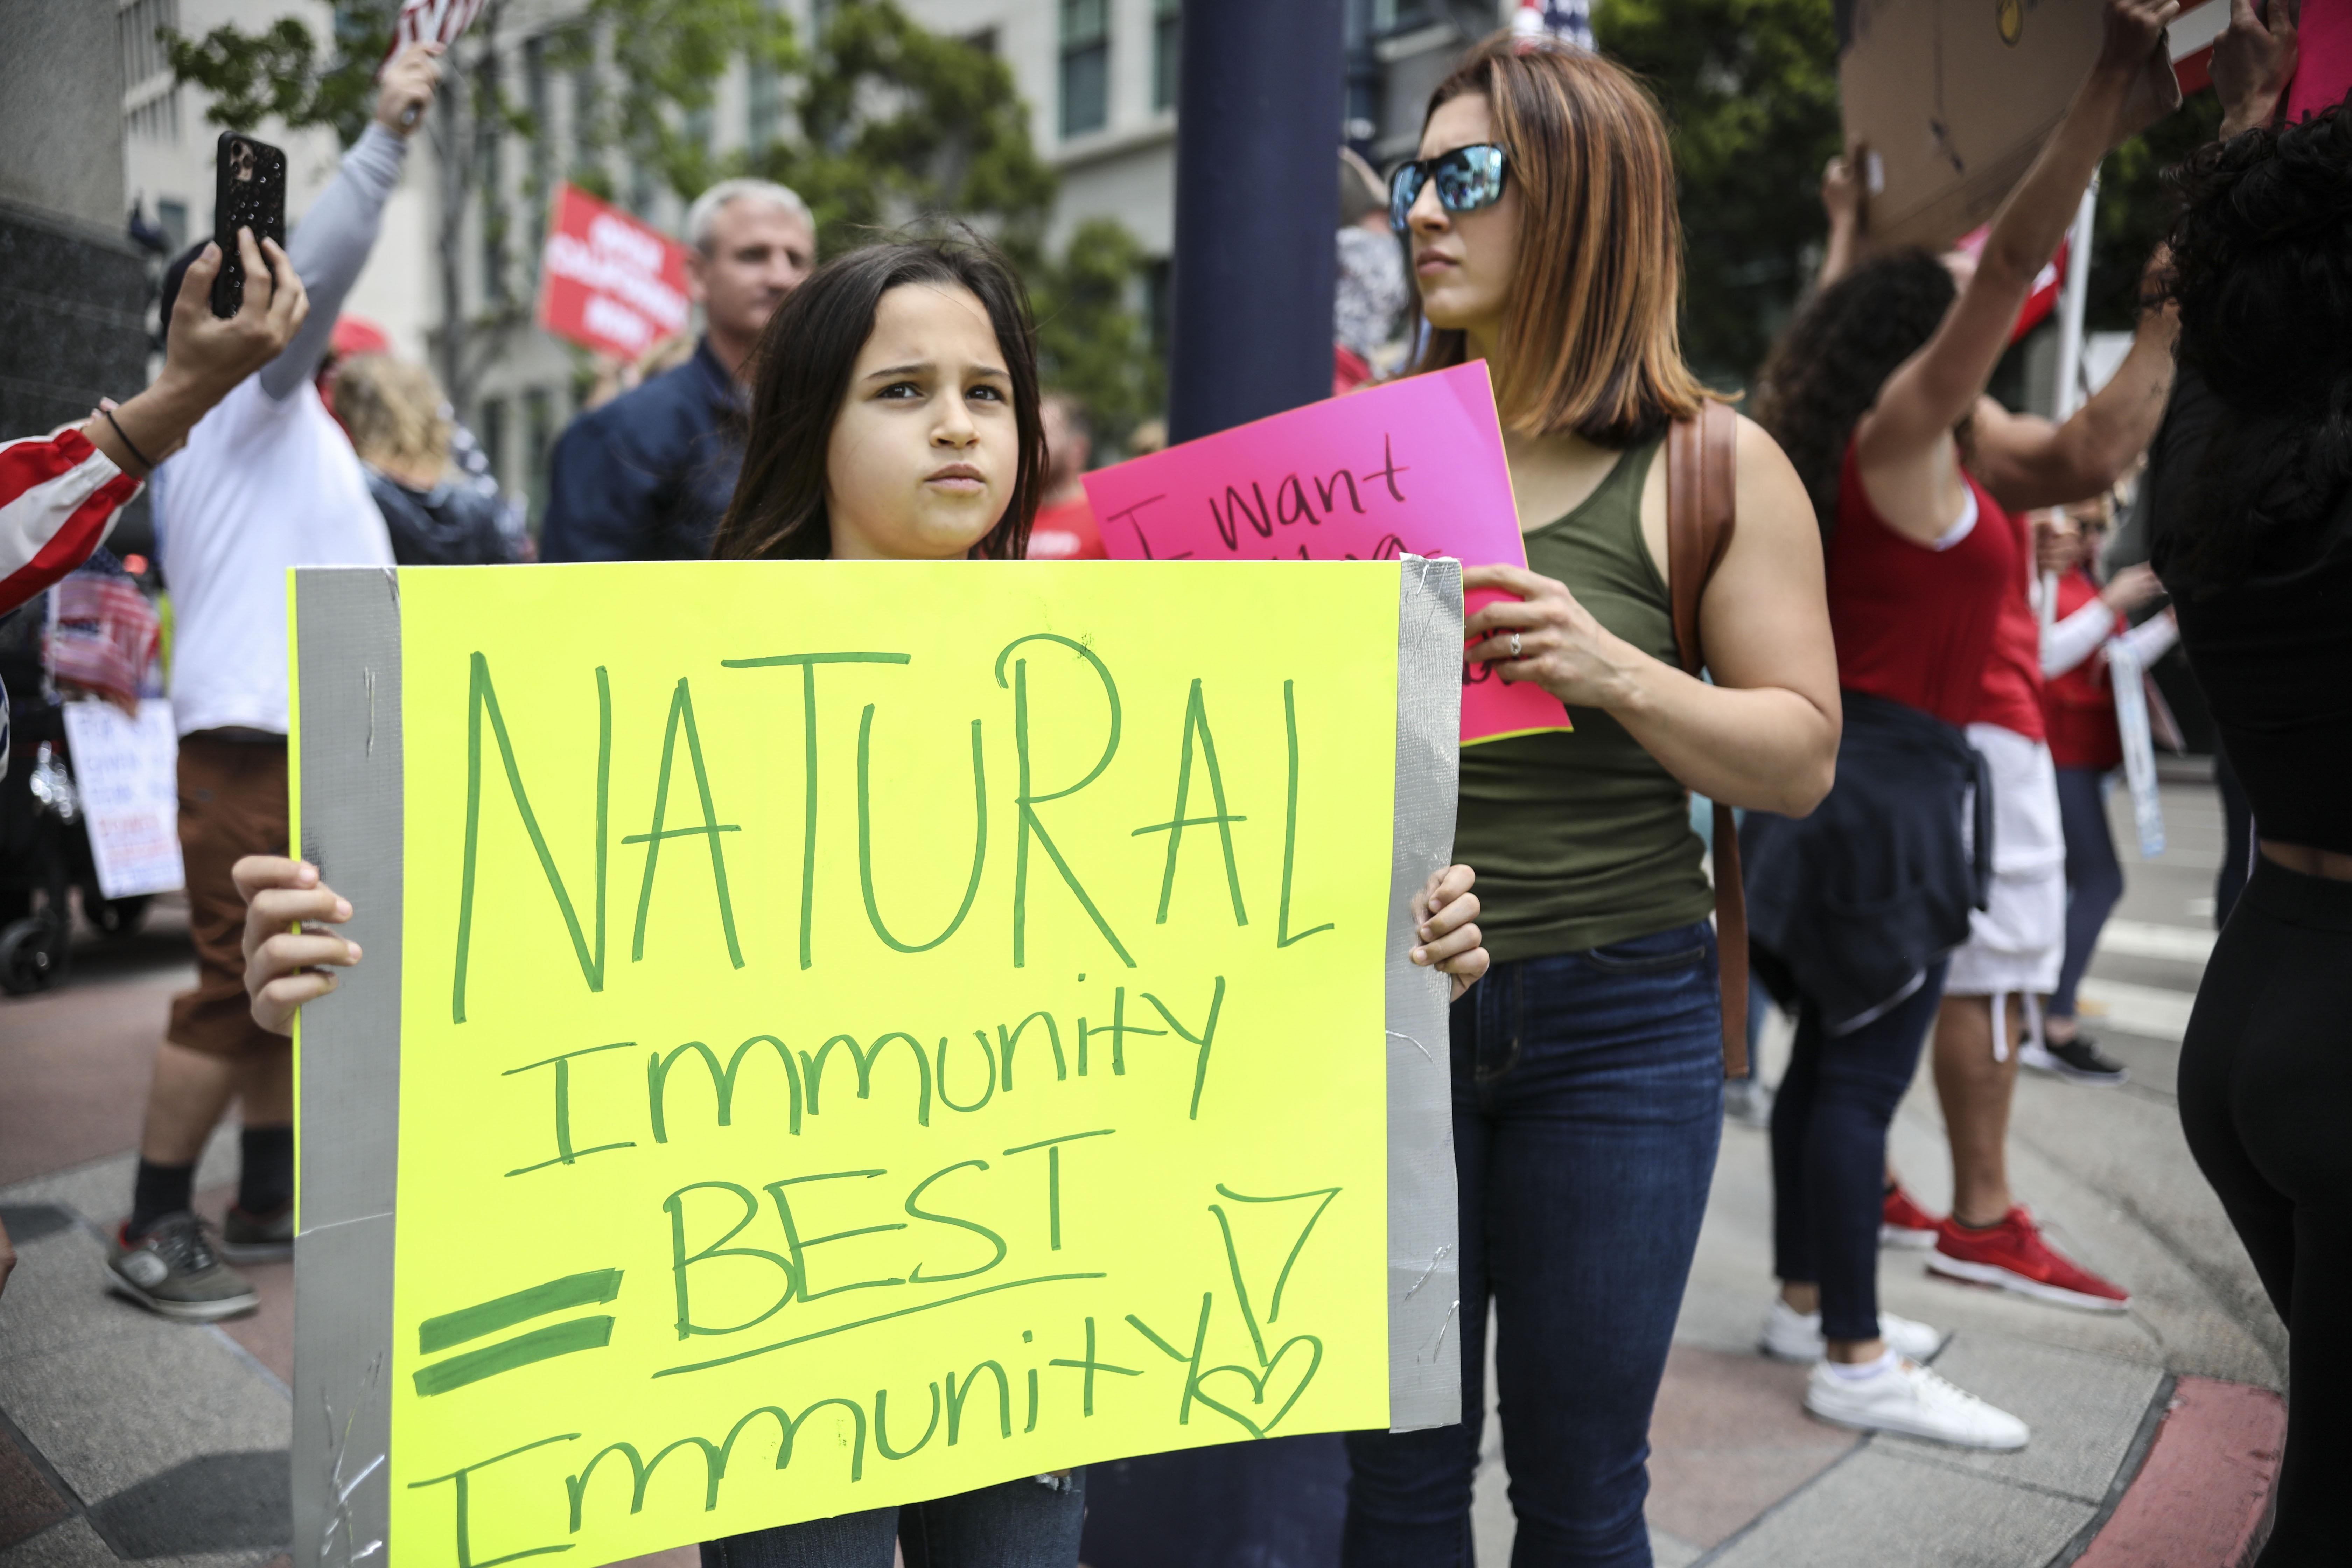 Several protesters on the street, one of them a child holding a sign that says "Natural Immunity = Best Immunity"